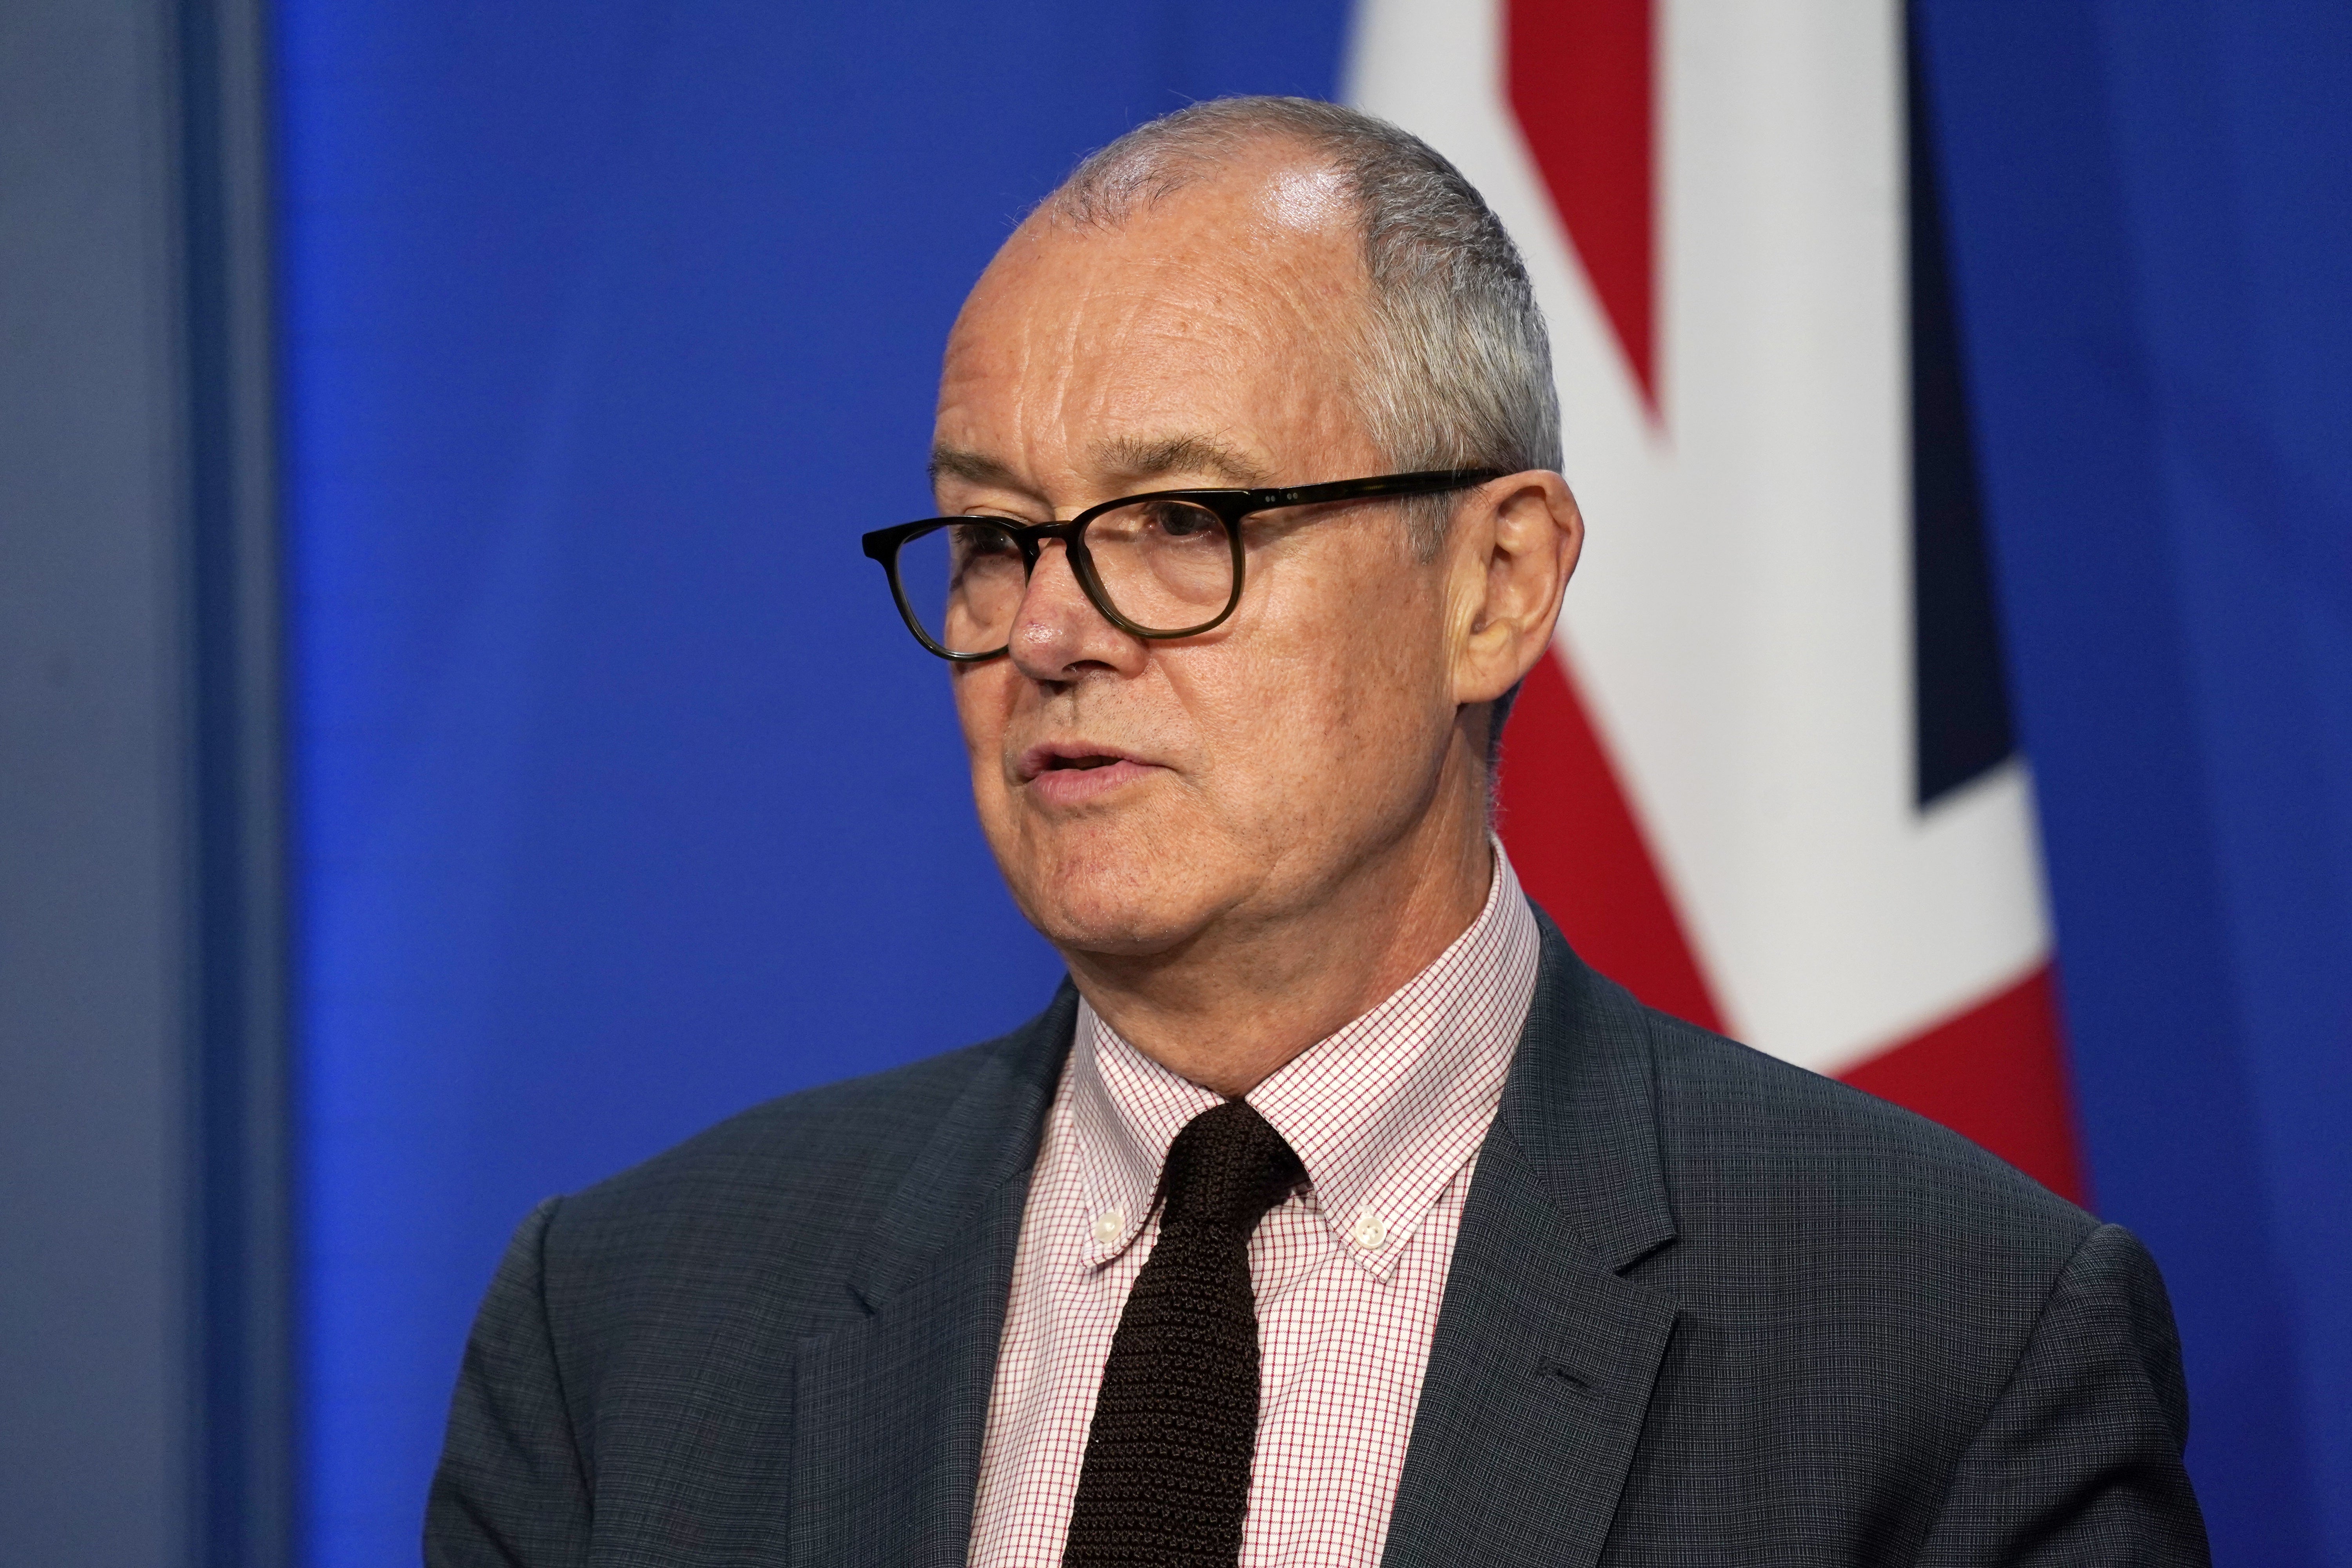 Sir Patrick Vallance wrote in his diary about fears that scientists were ‘used as human shields’ by ministers